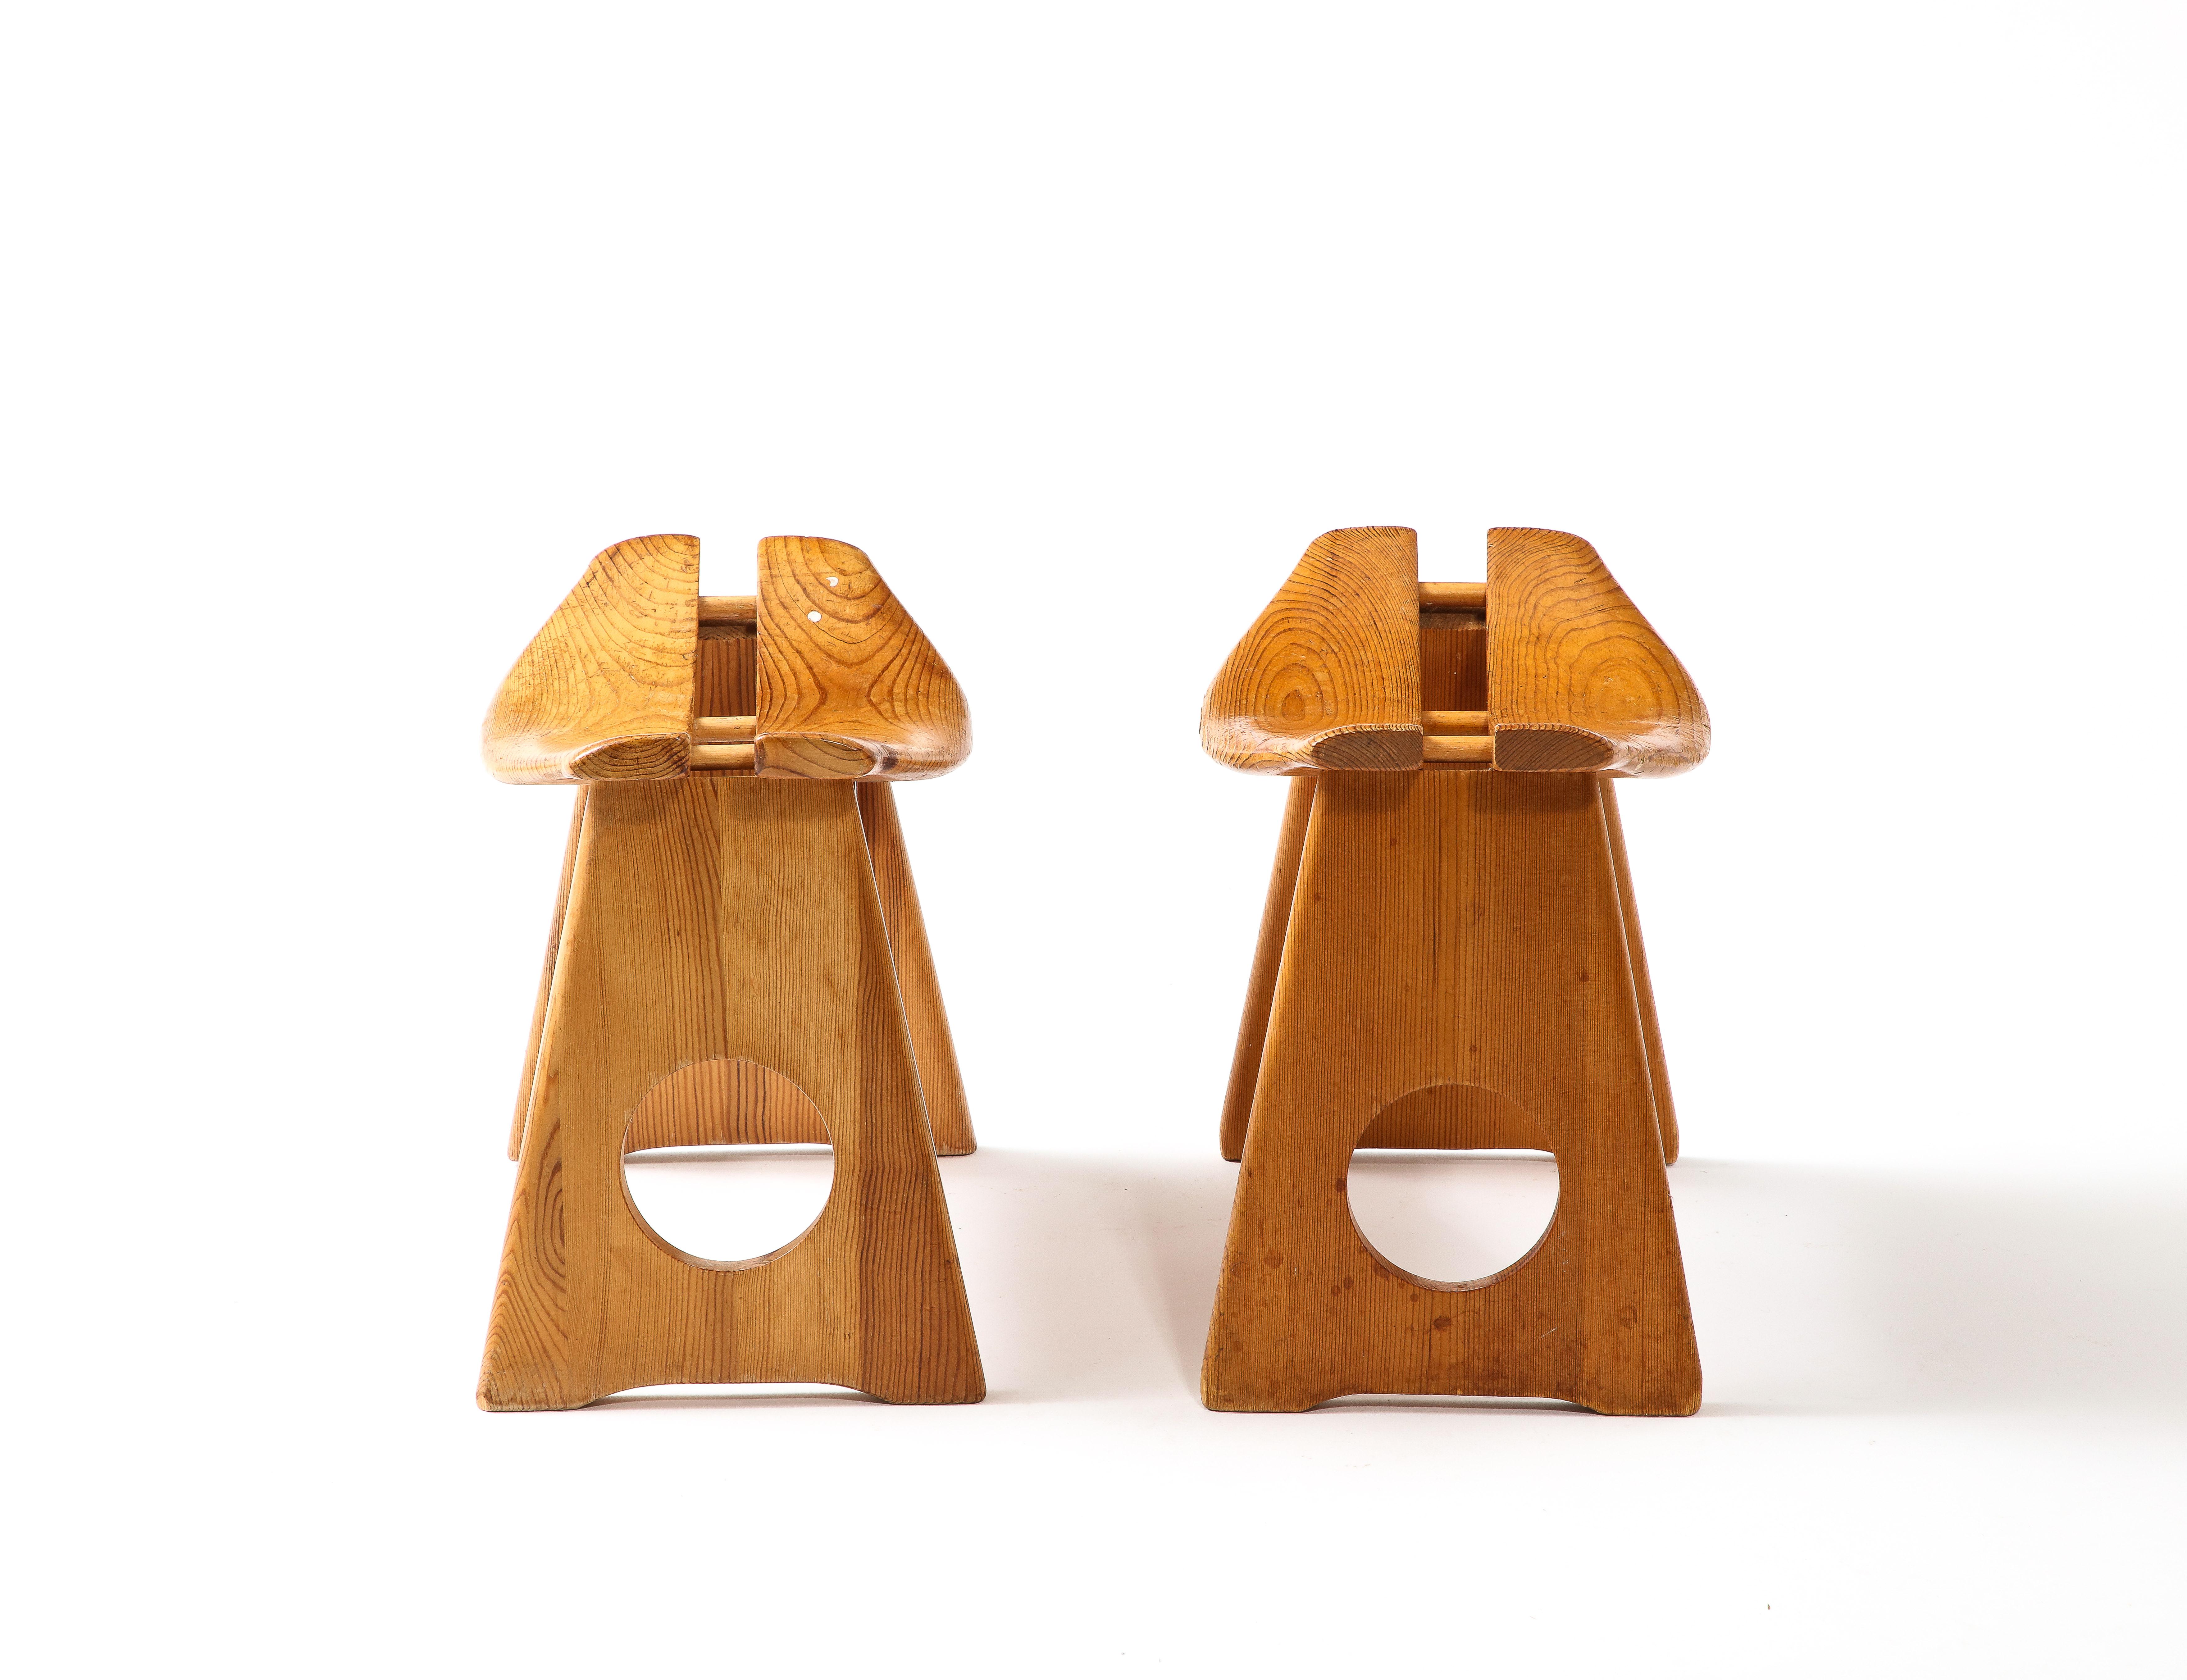 Small oak stools, ideal to hold towels, baskets, or objects, or as an occasional seat.
